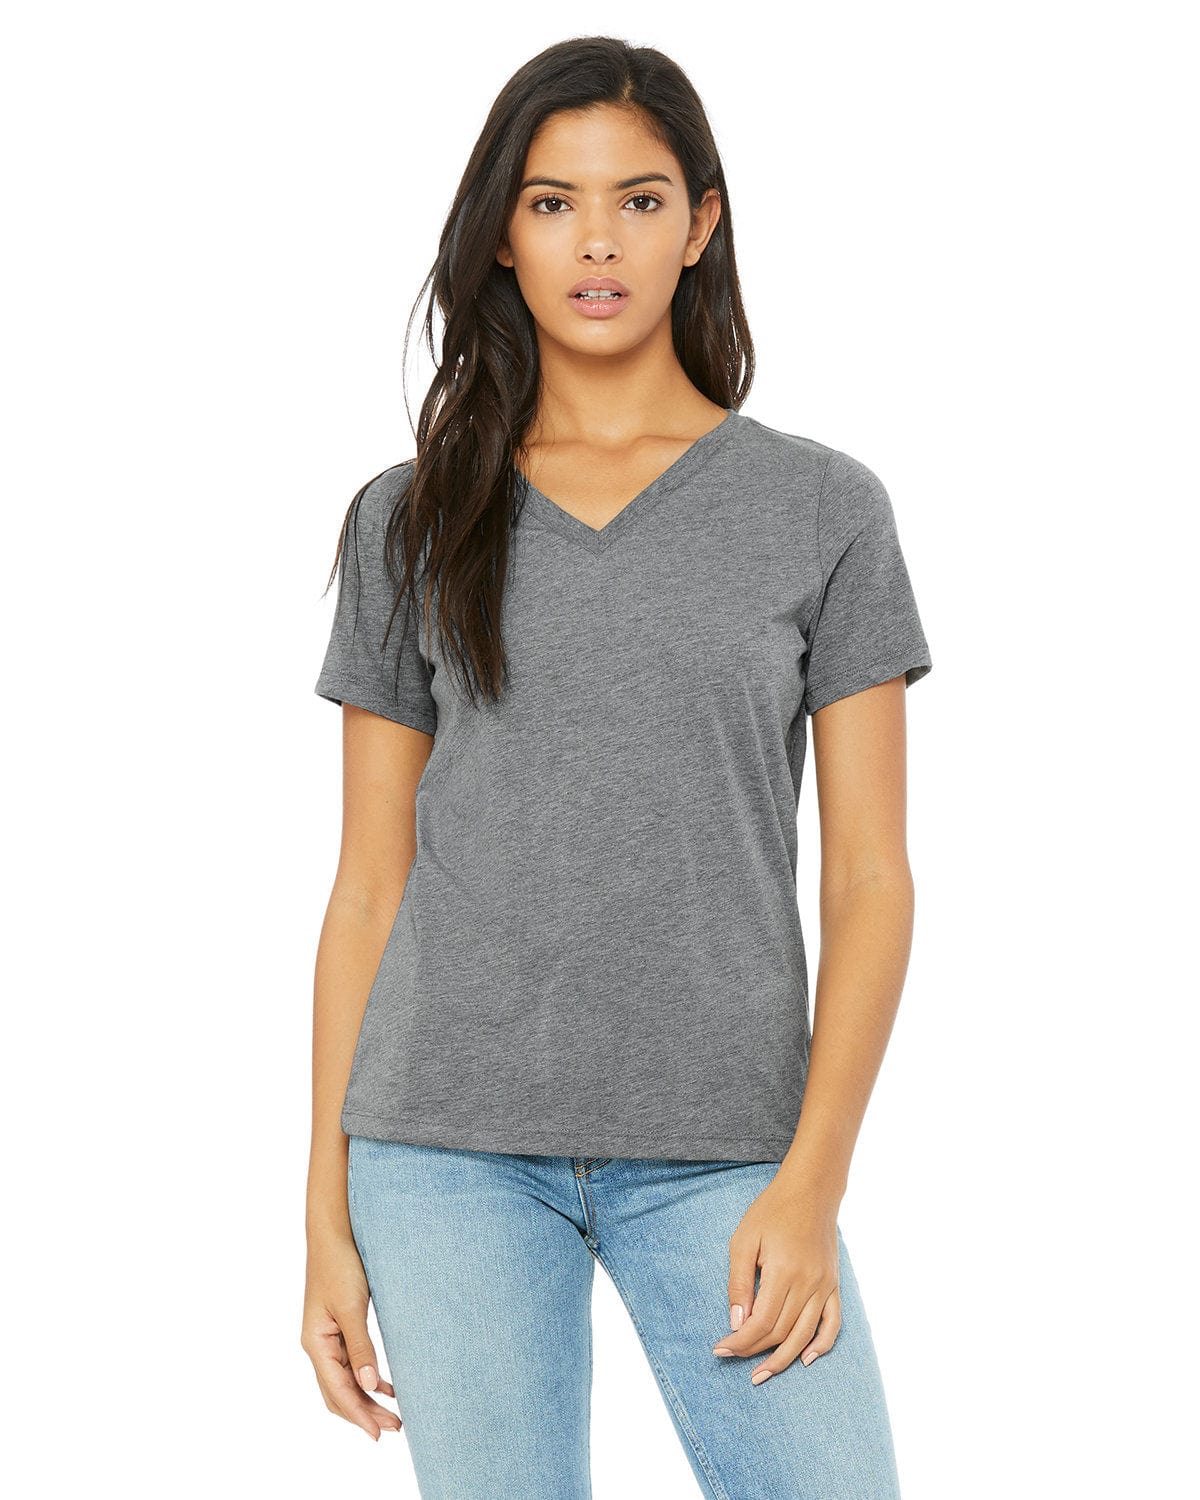 Bella+Canvas 6415: Ladies' Relaxed Triblend V-Neck T-Shirt